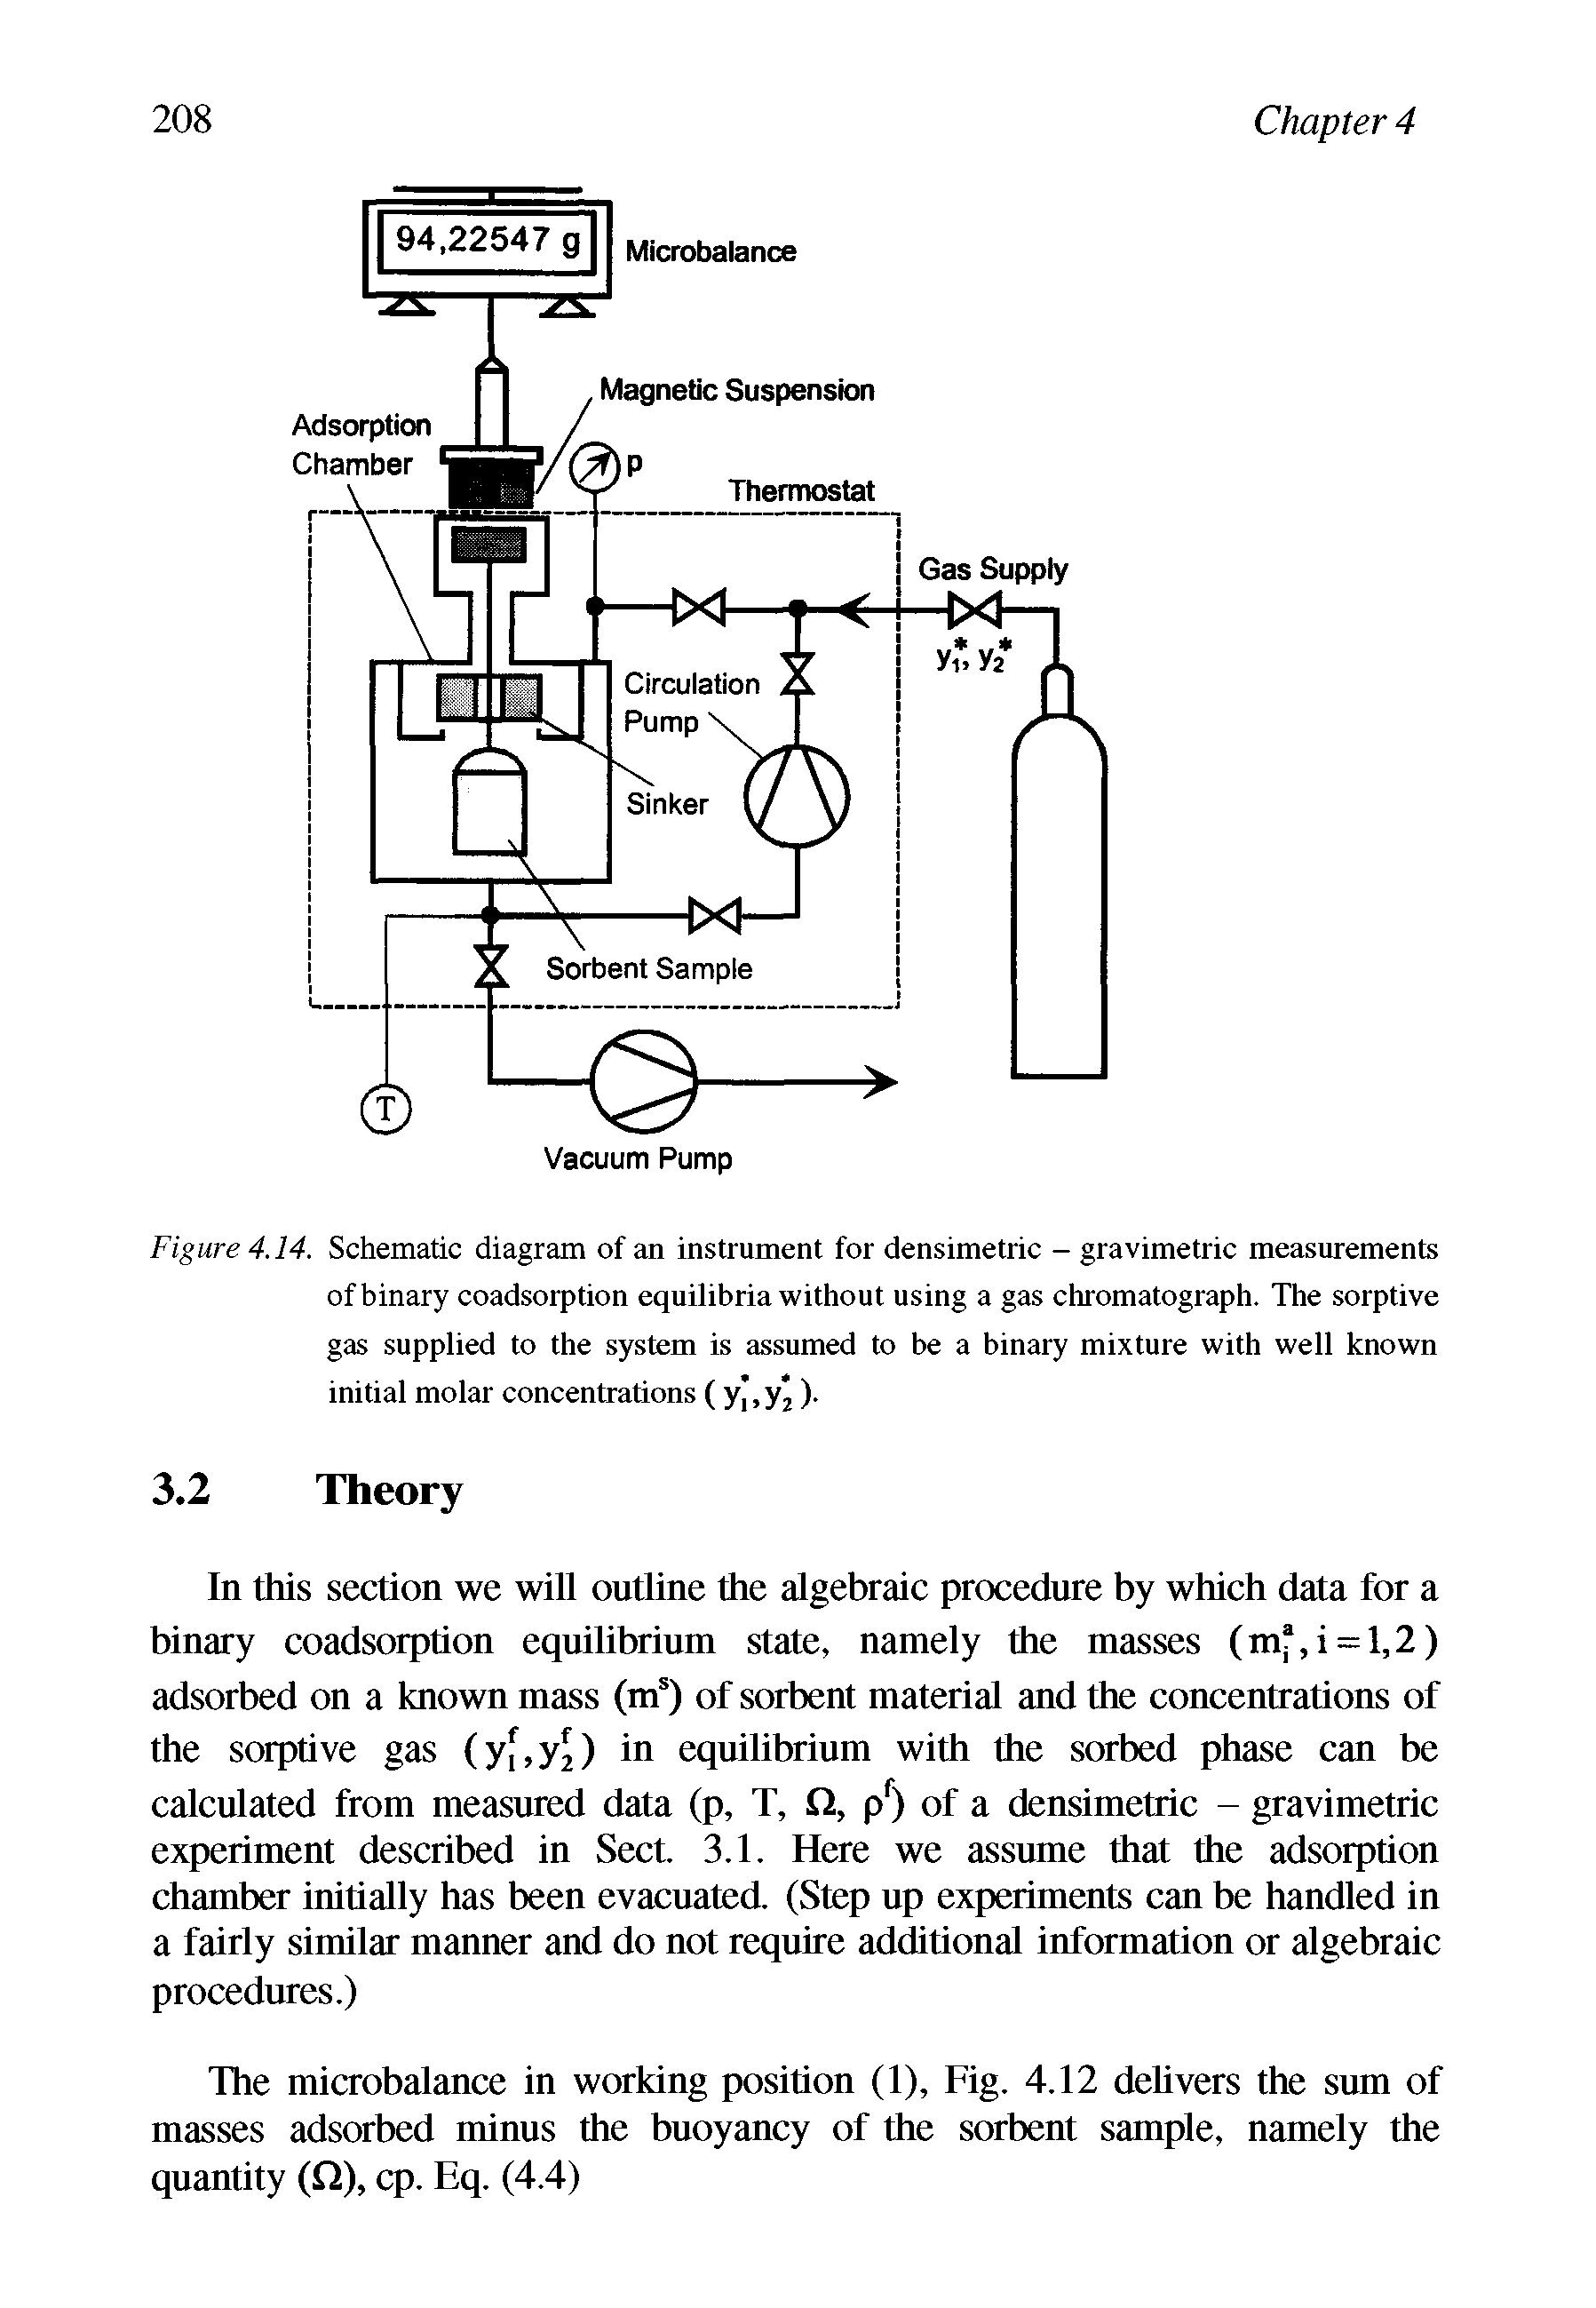 Figure 4.14. Schematic diagram of an instrument for densimetric - gravimetric measurements of binary coadsorption equilibria without using a gas chromatograph. The sorptive gas supplied to the system is assumed to be a binary mixture with well known initial molar concentrations ( yJ.yj ) ...